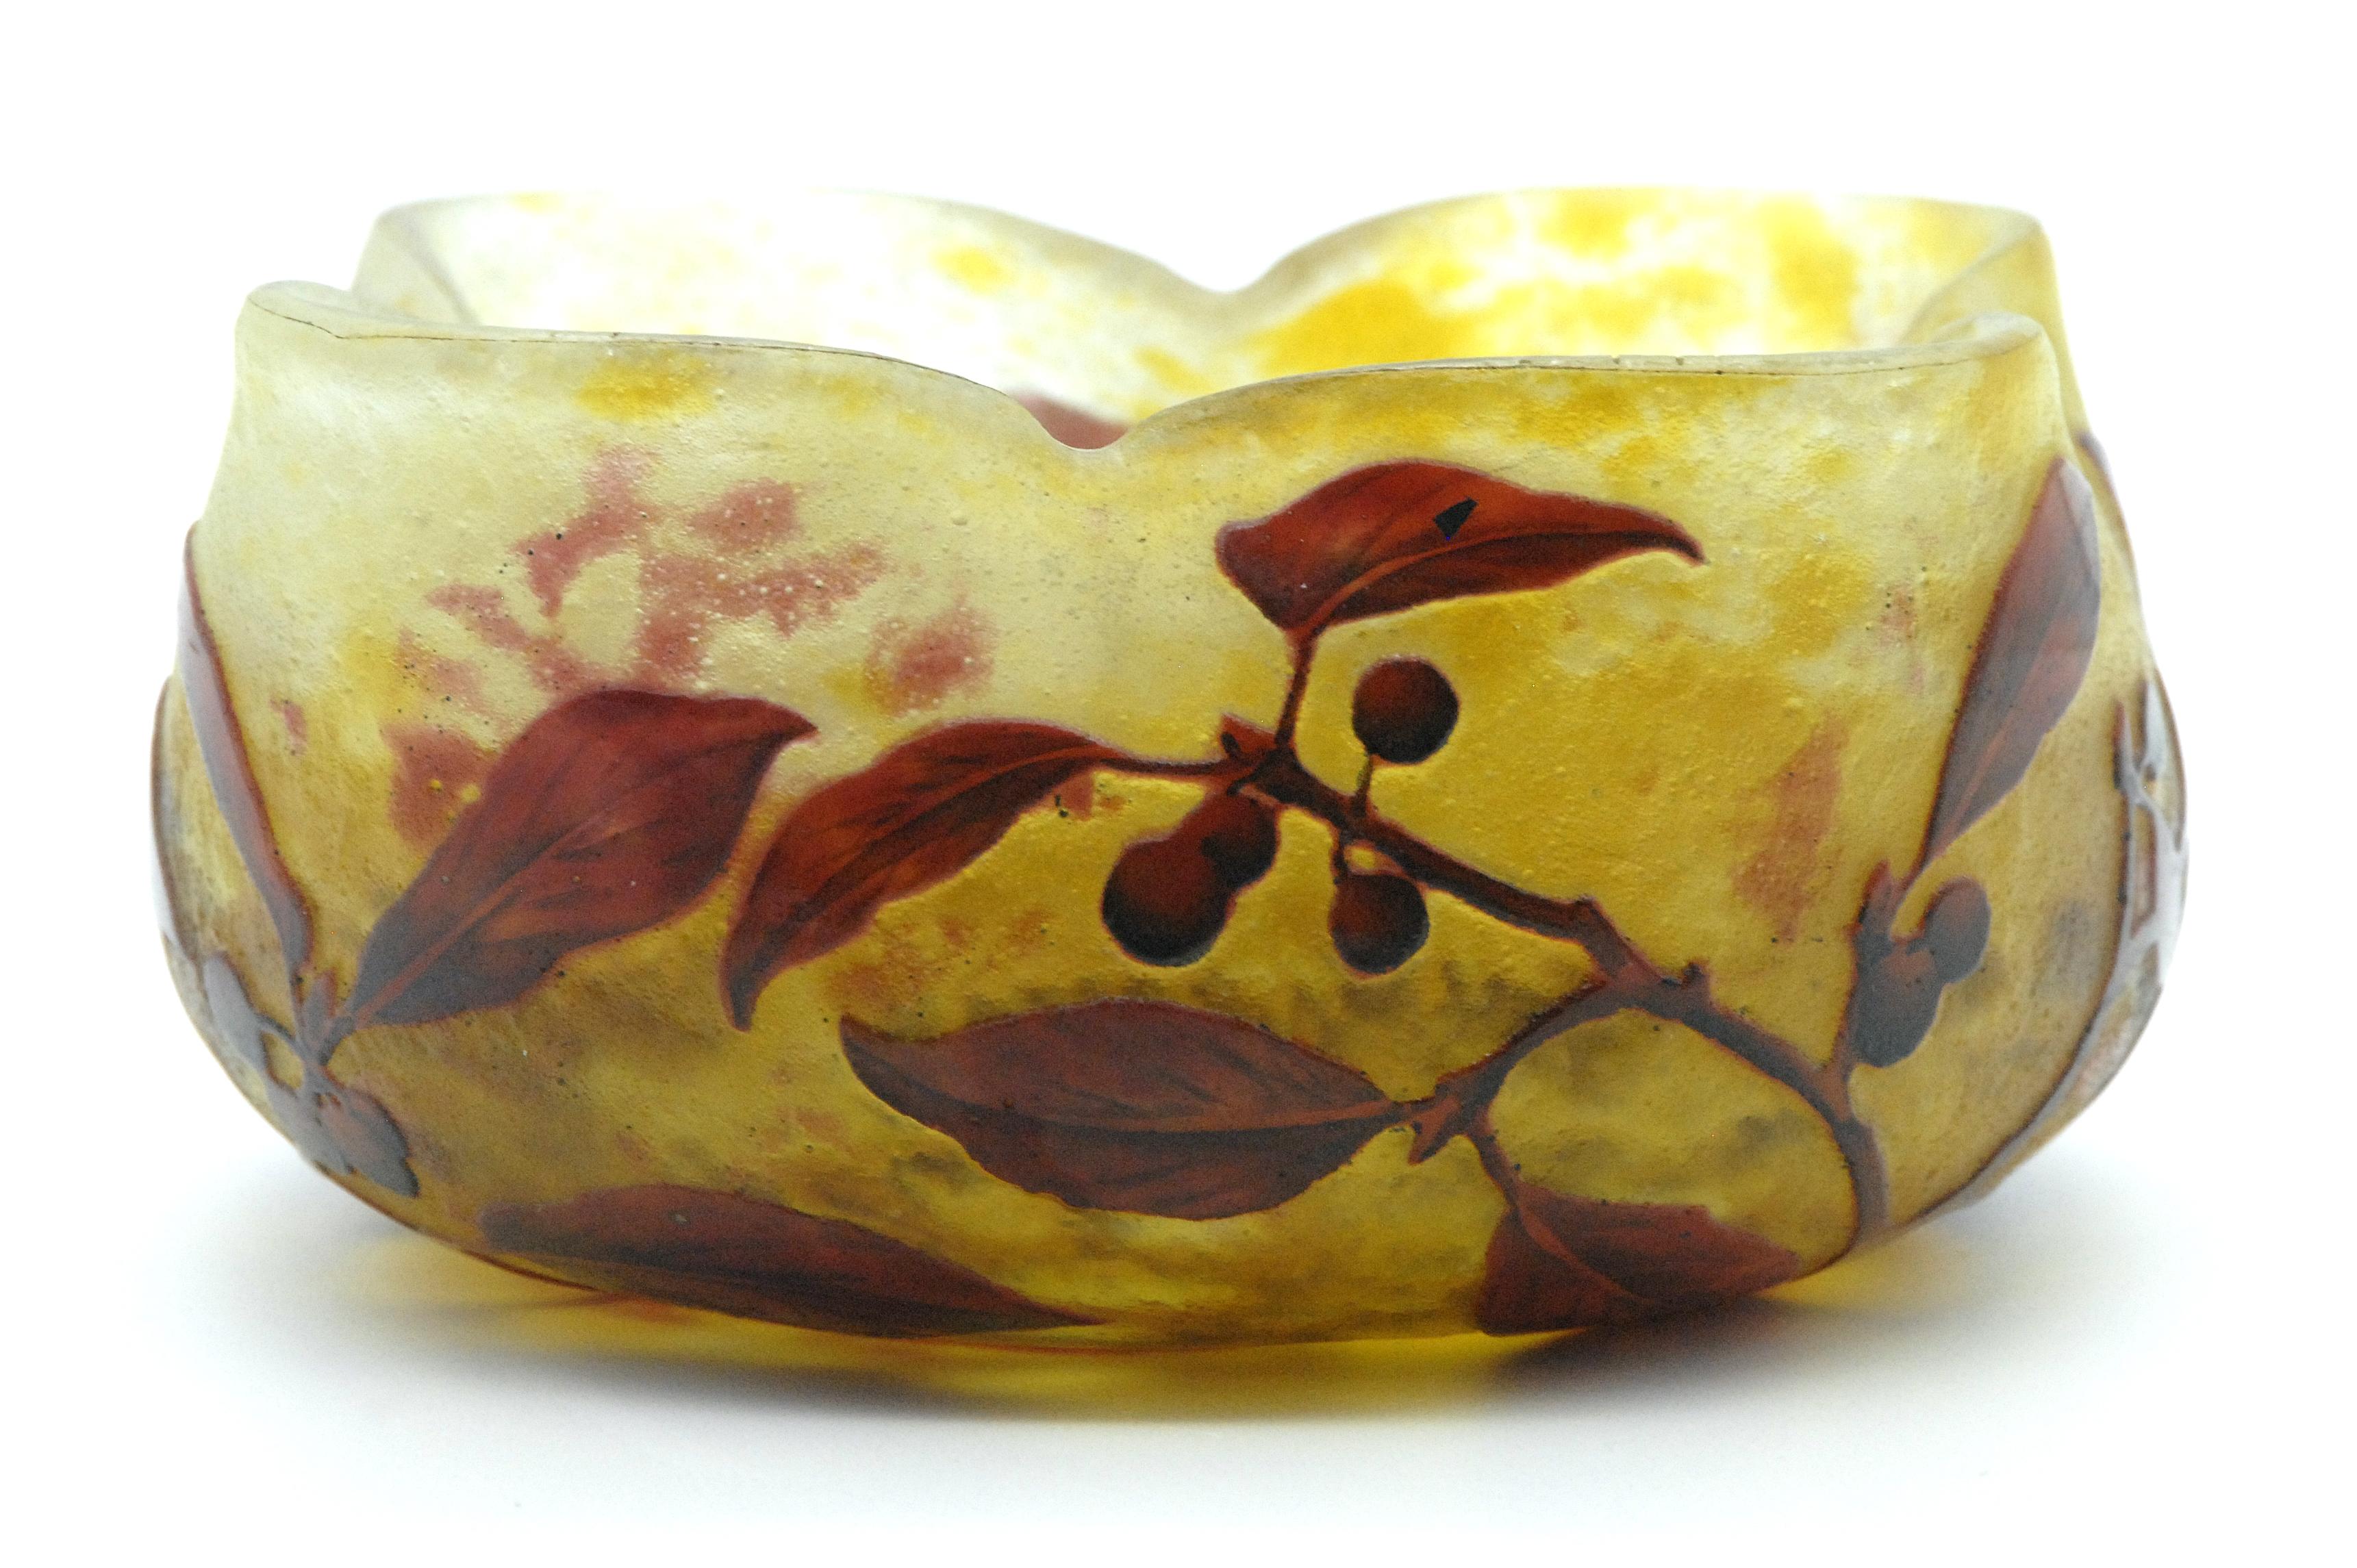 Leaves and berries trail on this rare cameo art glass bowl by the renowned French glassmaking firm of Daum, Nancy. The graceful vessel features a wavy-edged rim and orange/red leaves and berries trailing upon a sunset background of yellow and amber.